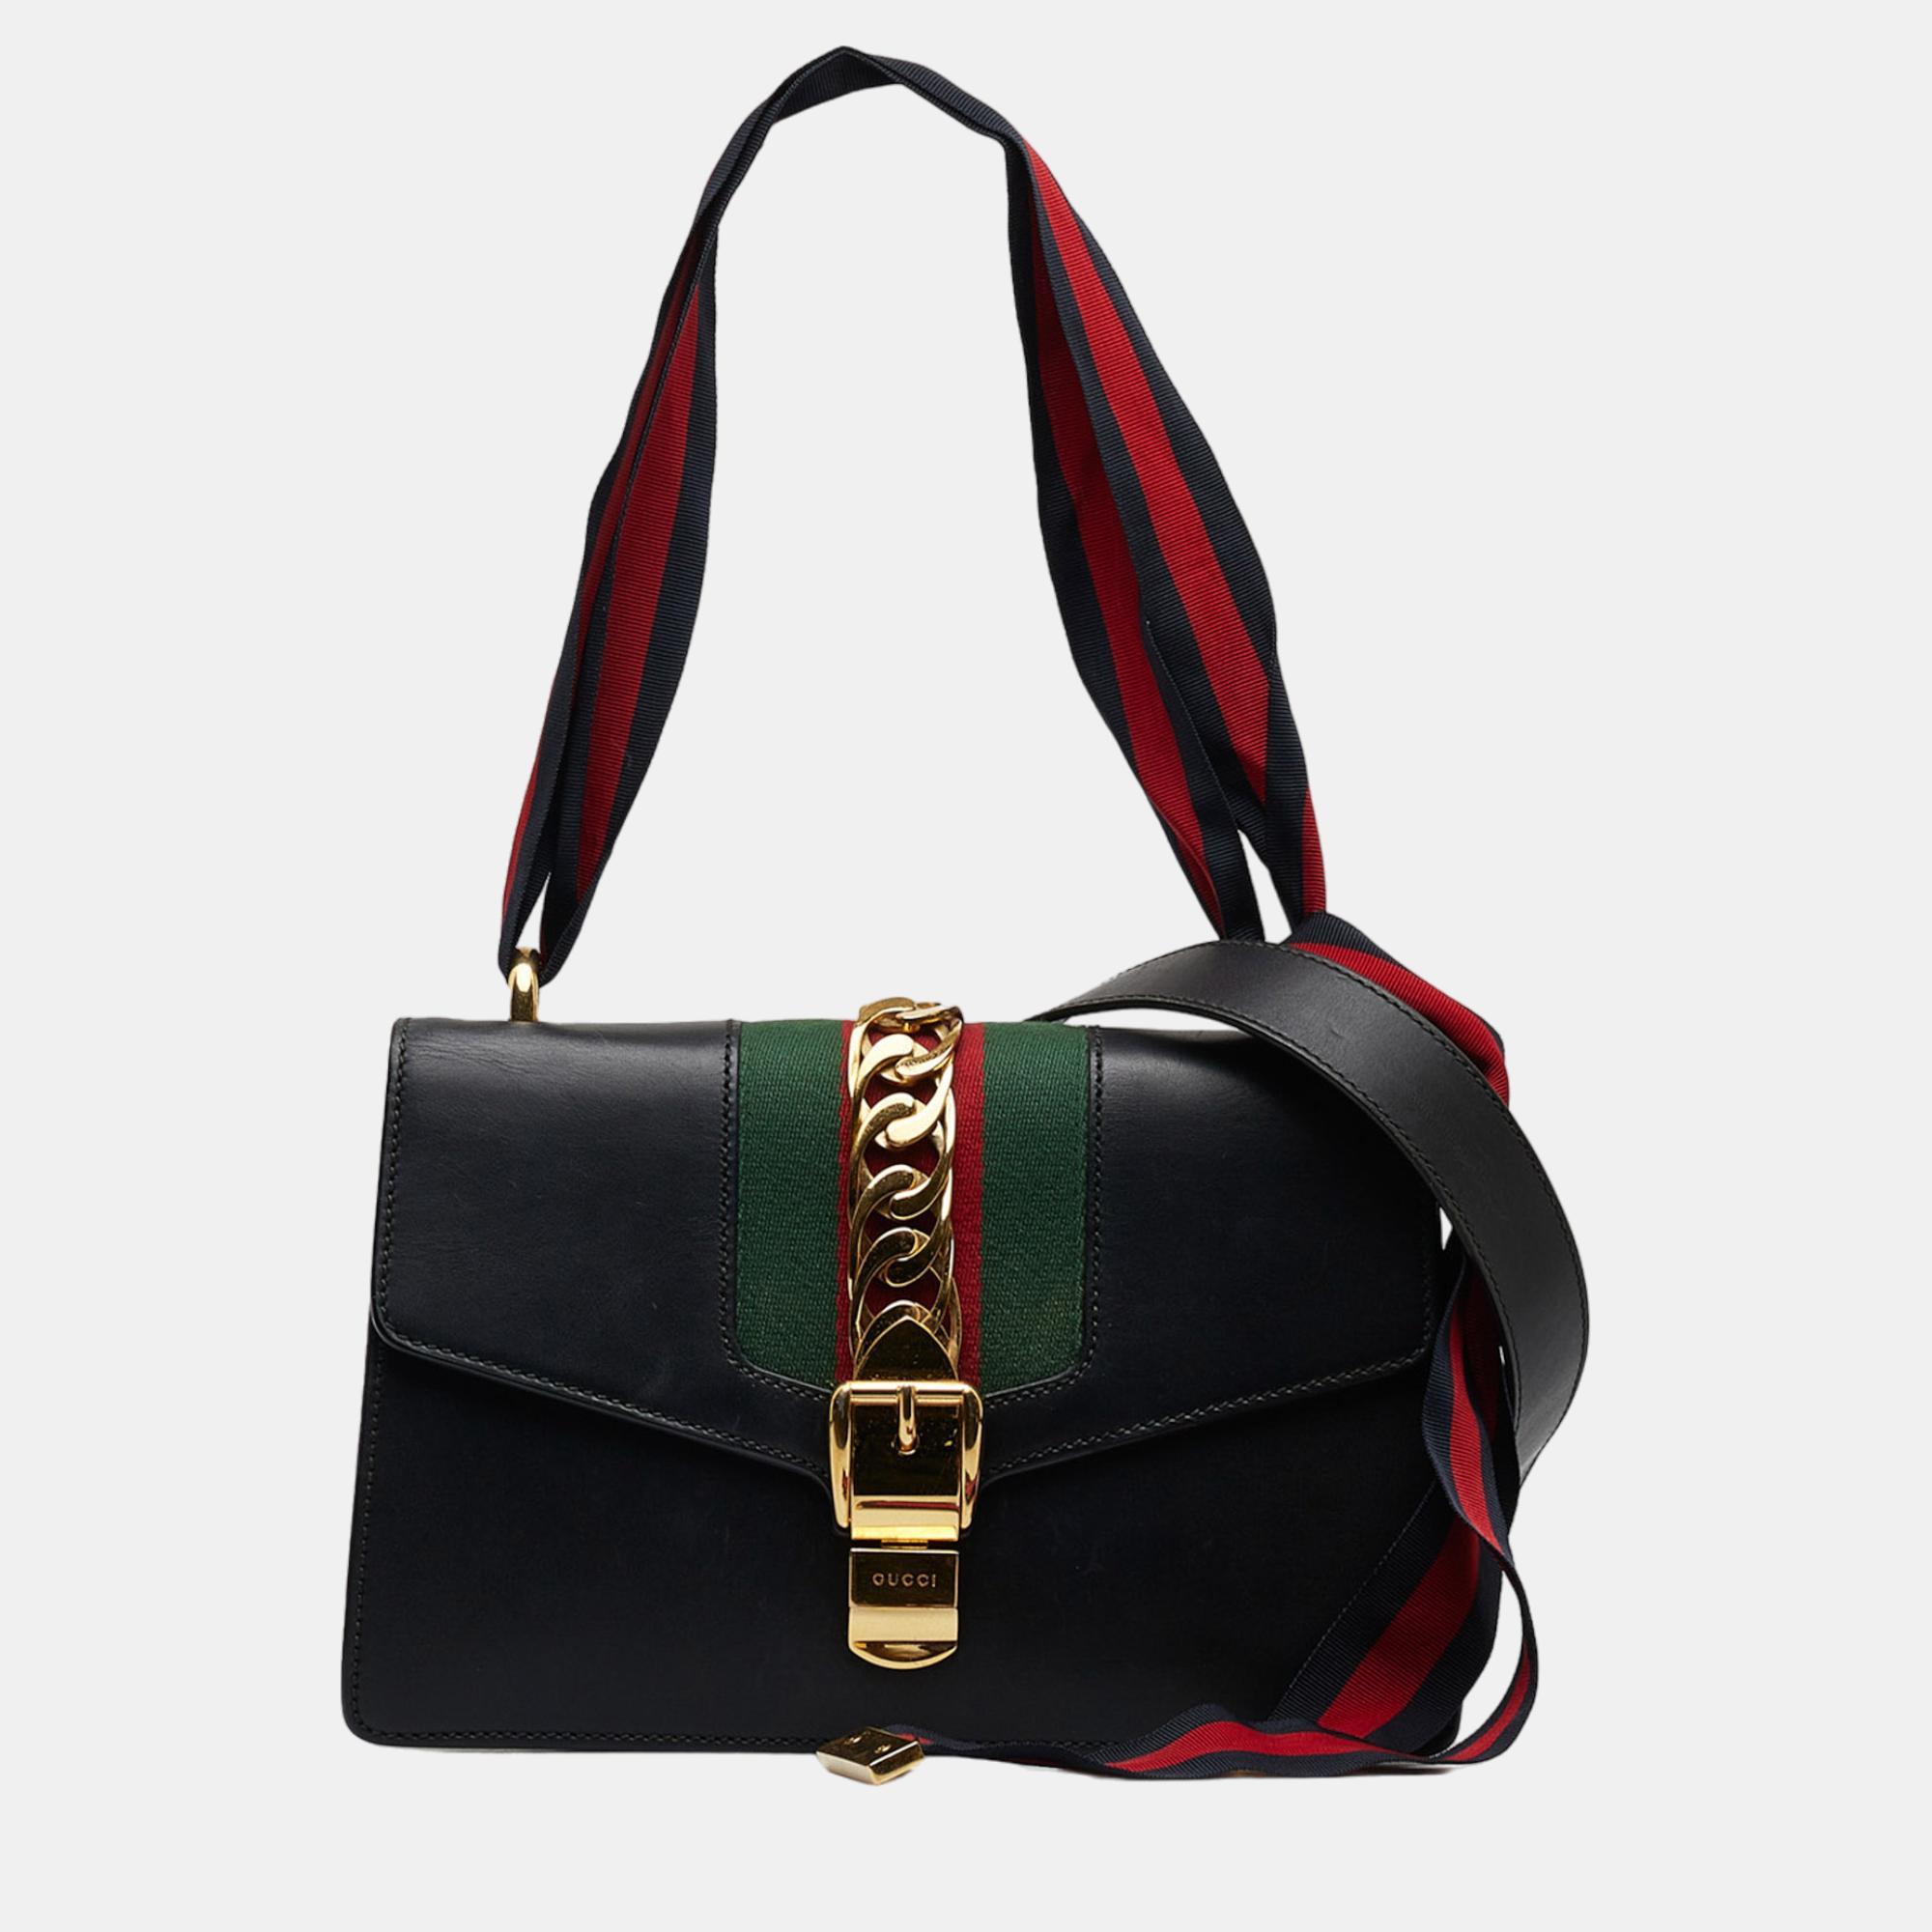 Pre-owned Gucci Black Small Sylvie Satchel